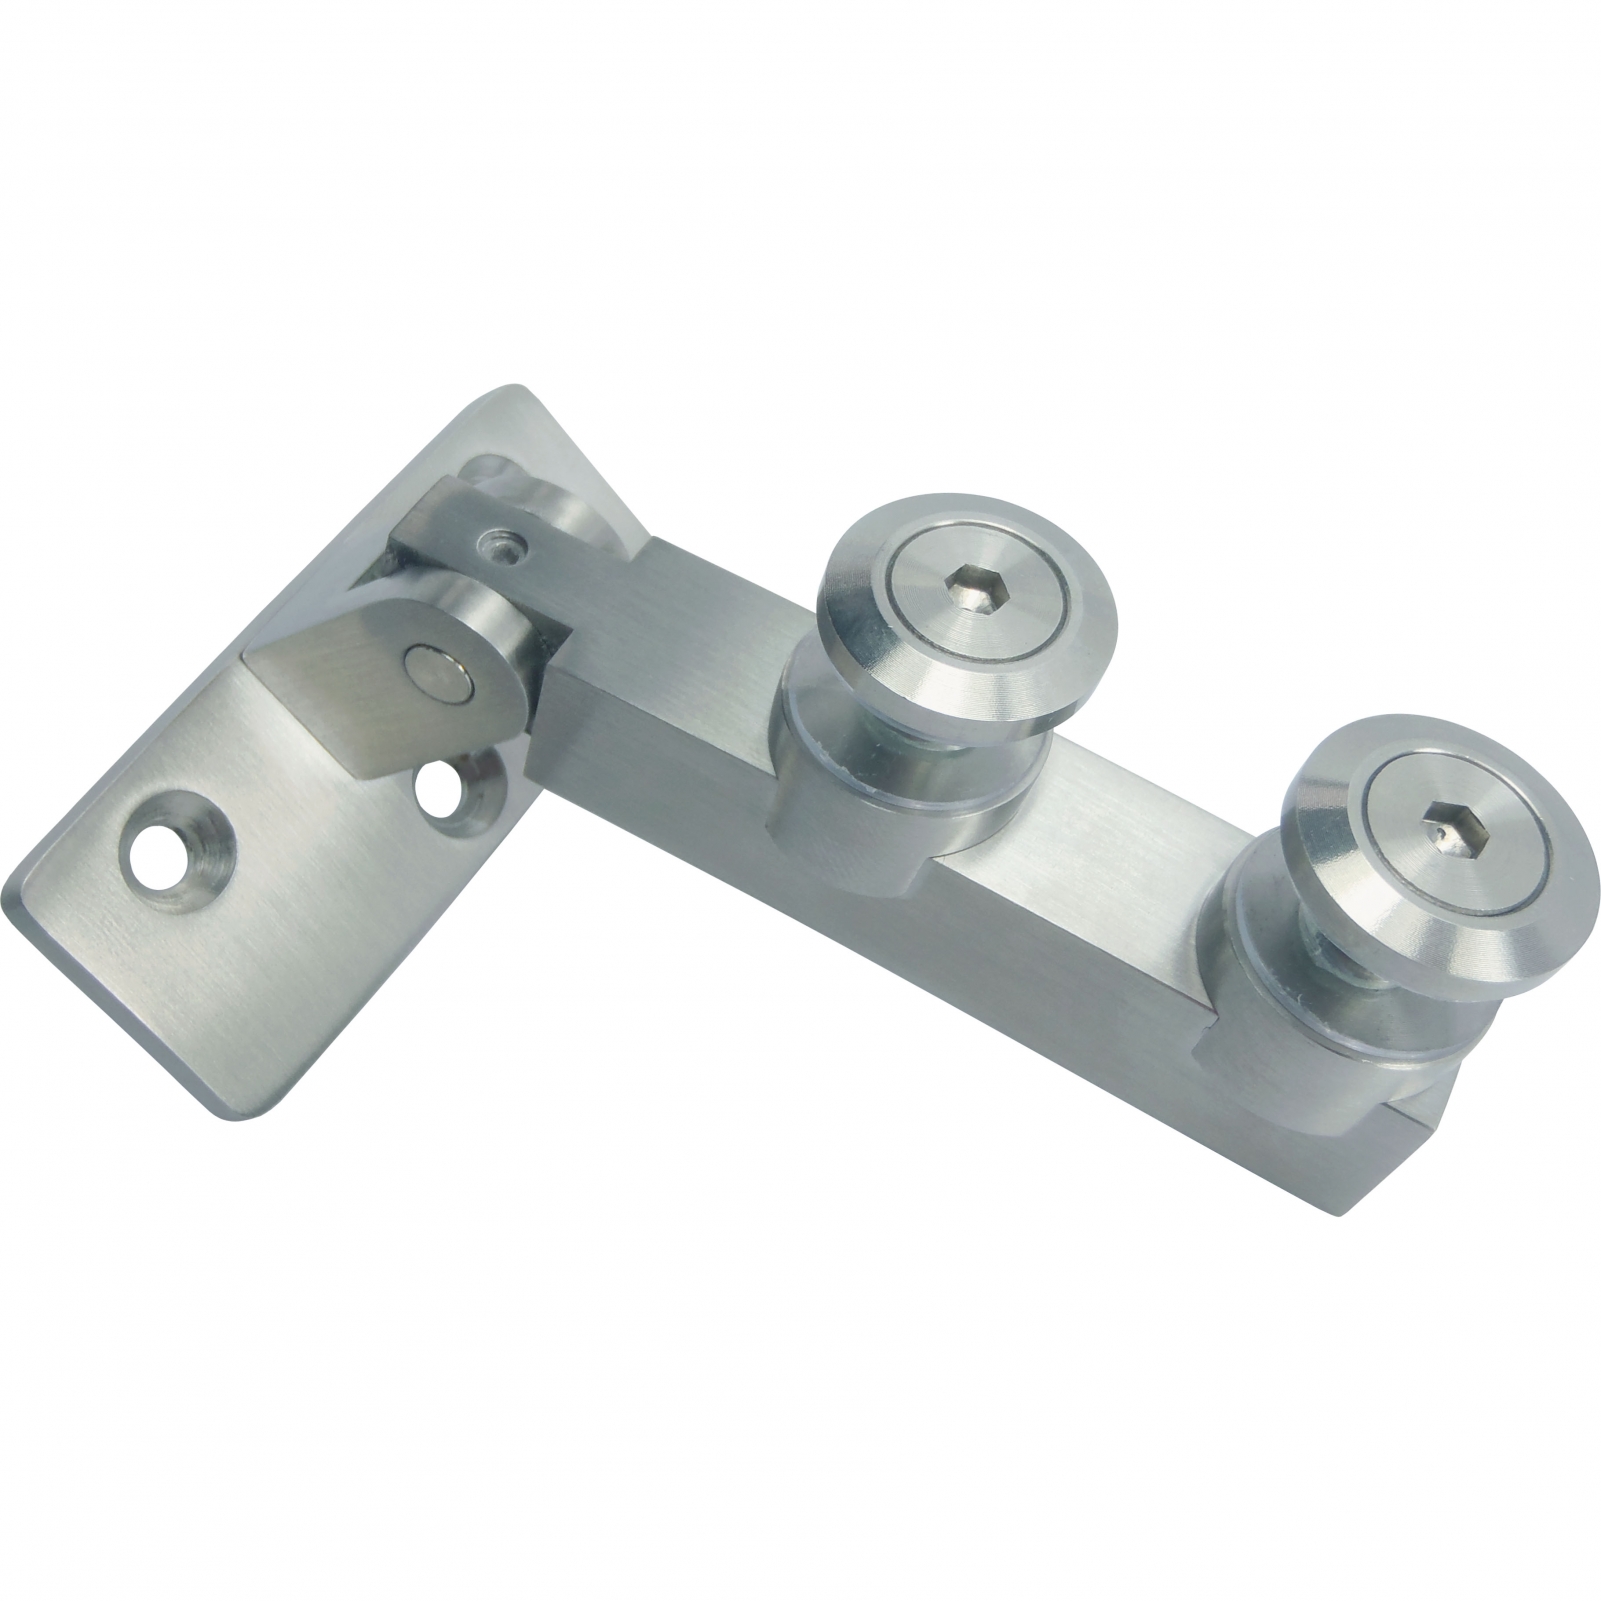 Non-Spring Glass Hinges